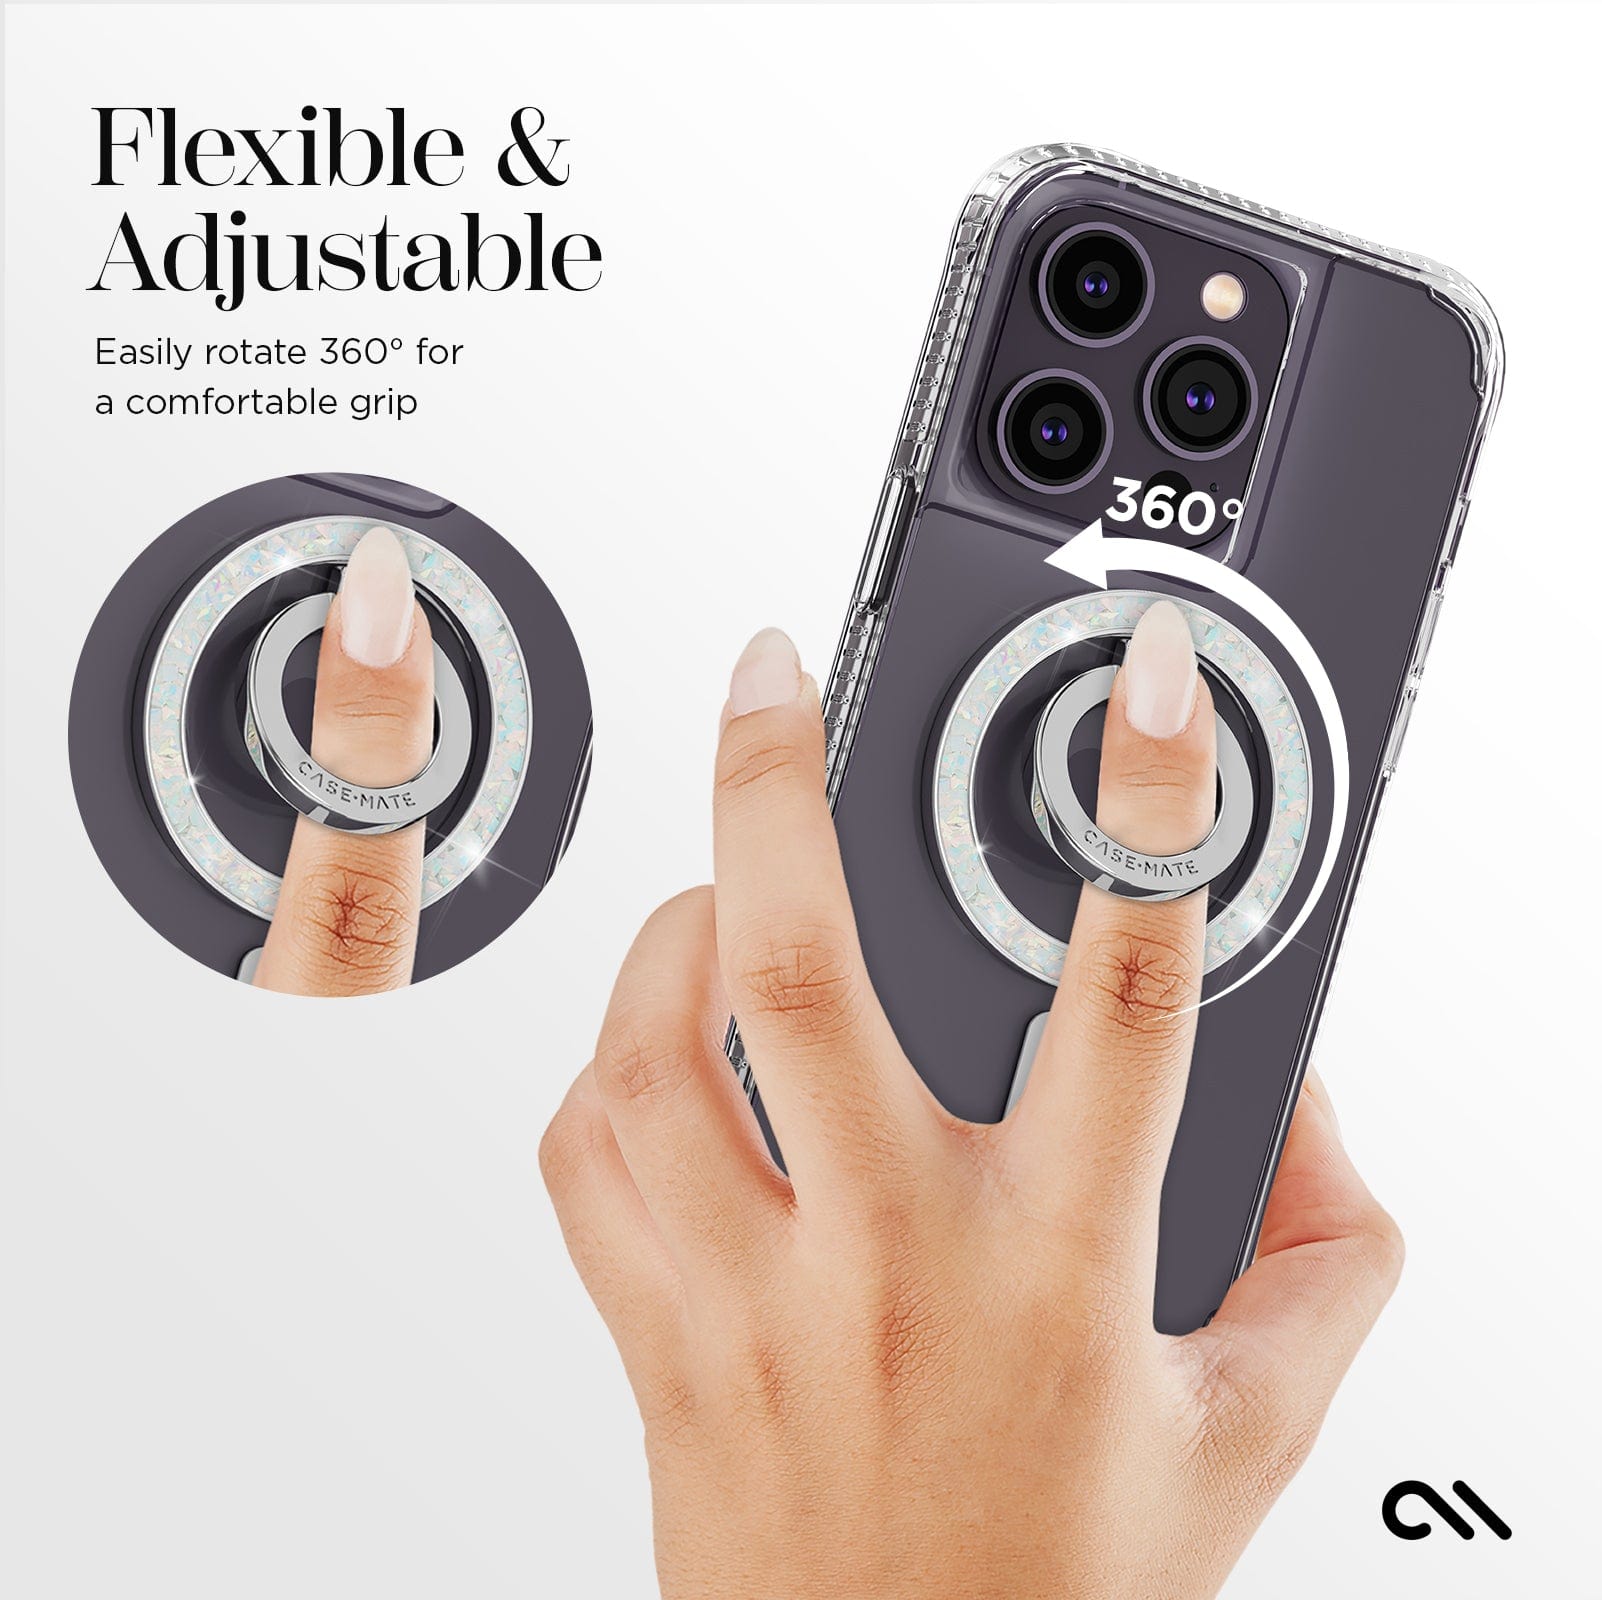 FLEXIBLE & ADJUSTABLE. EASILY ROTATE 360 DEGREES FOR COMFORTABLE GRIP.